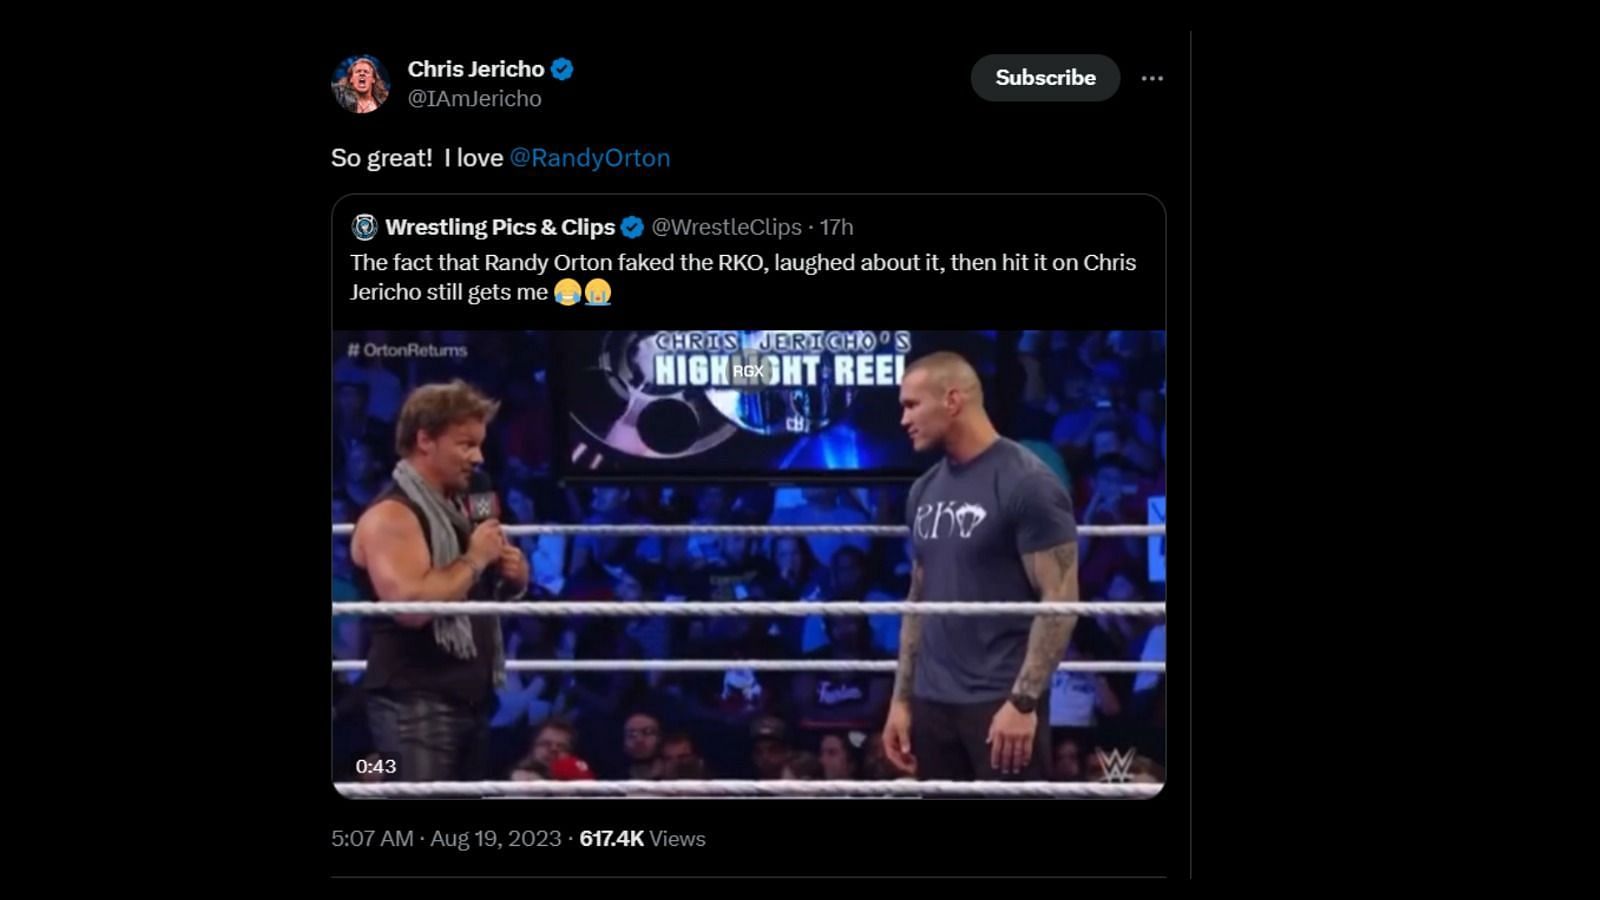 Chris Jericho reacts to his segment with Randy Orton in WWE.